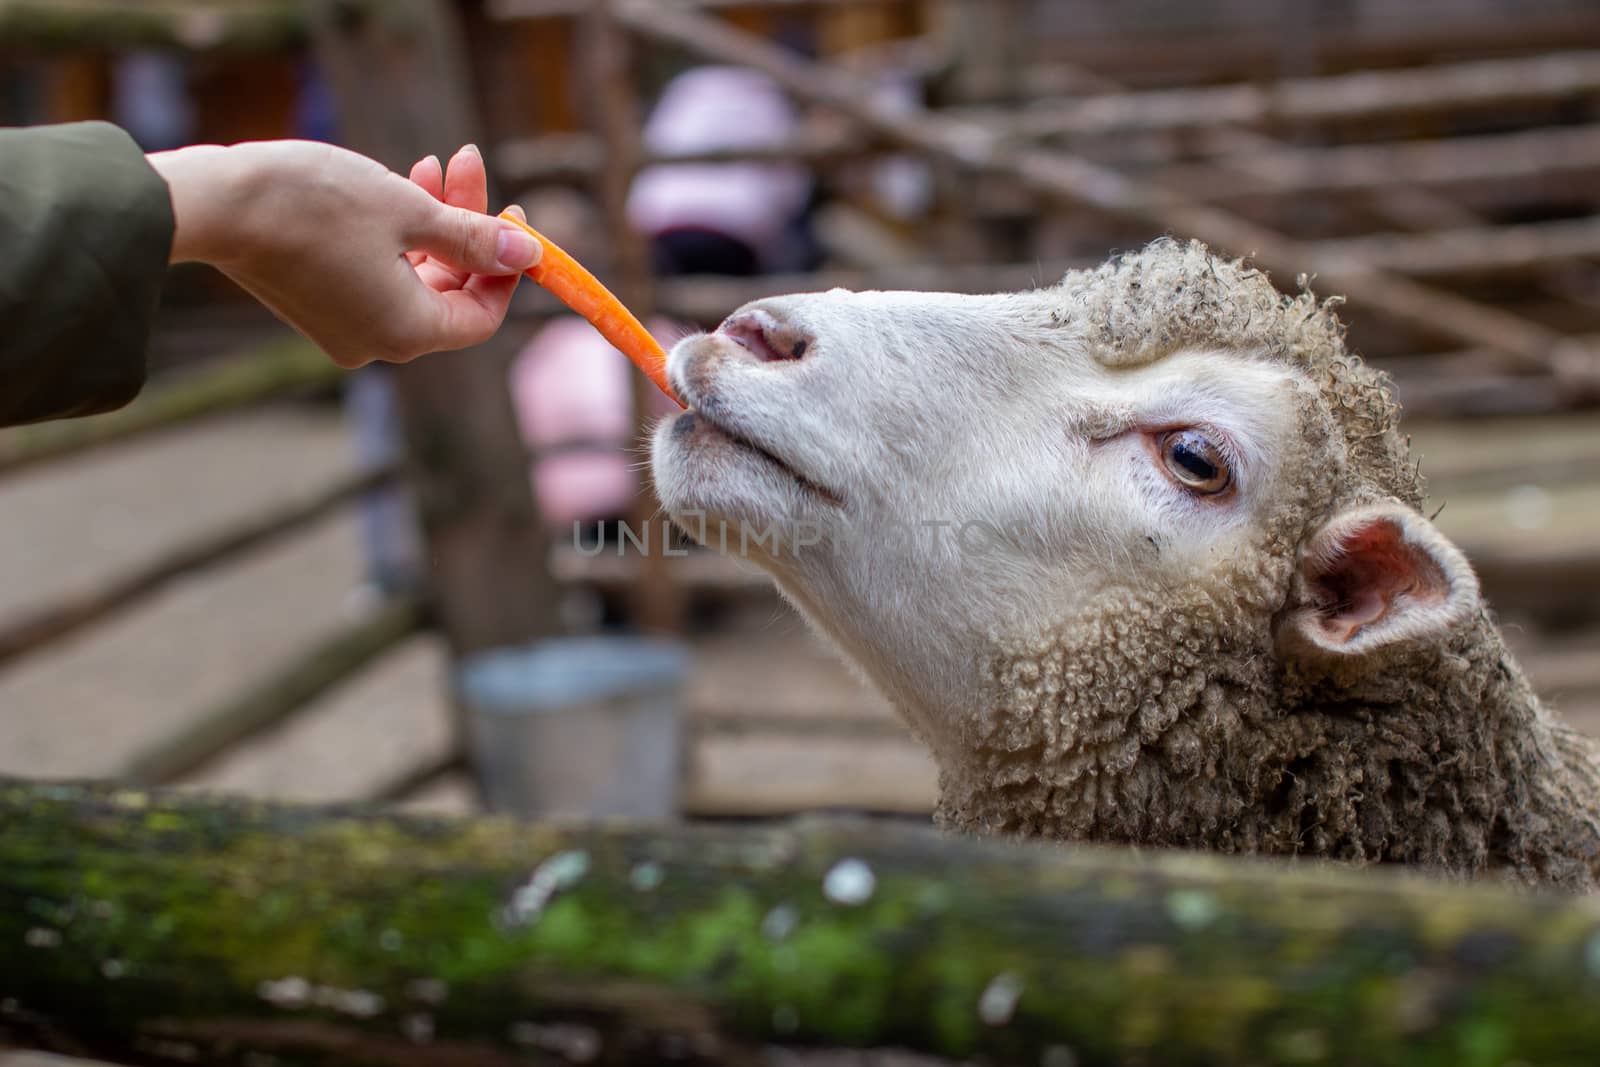 A man feeds white sheep over a fence. Sheep poke their heads through  by AnatoliiFoto